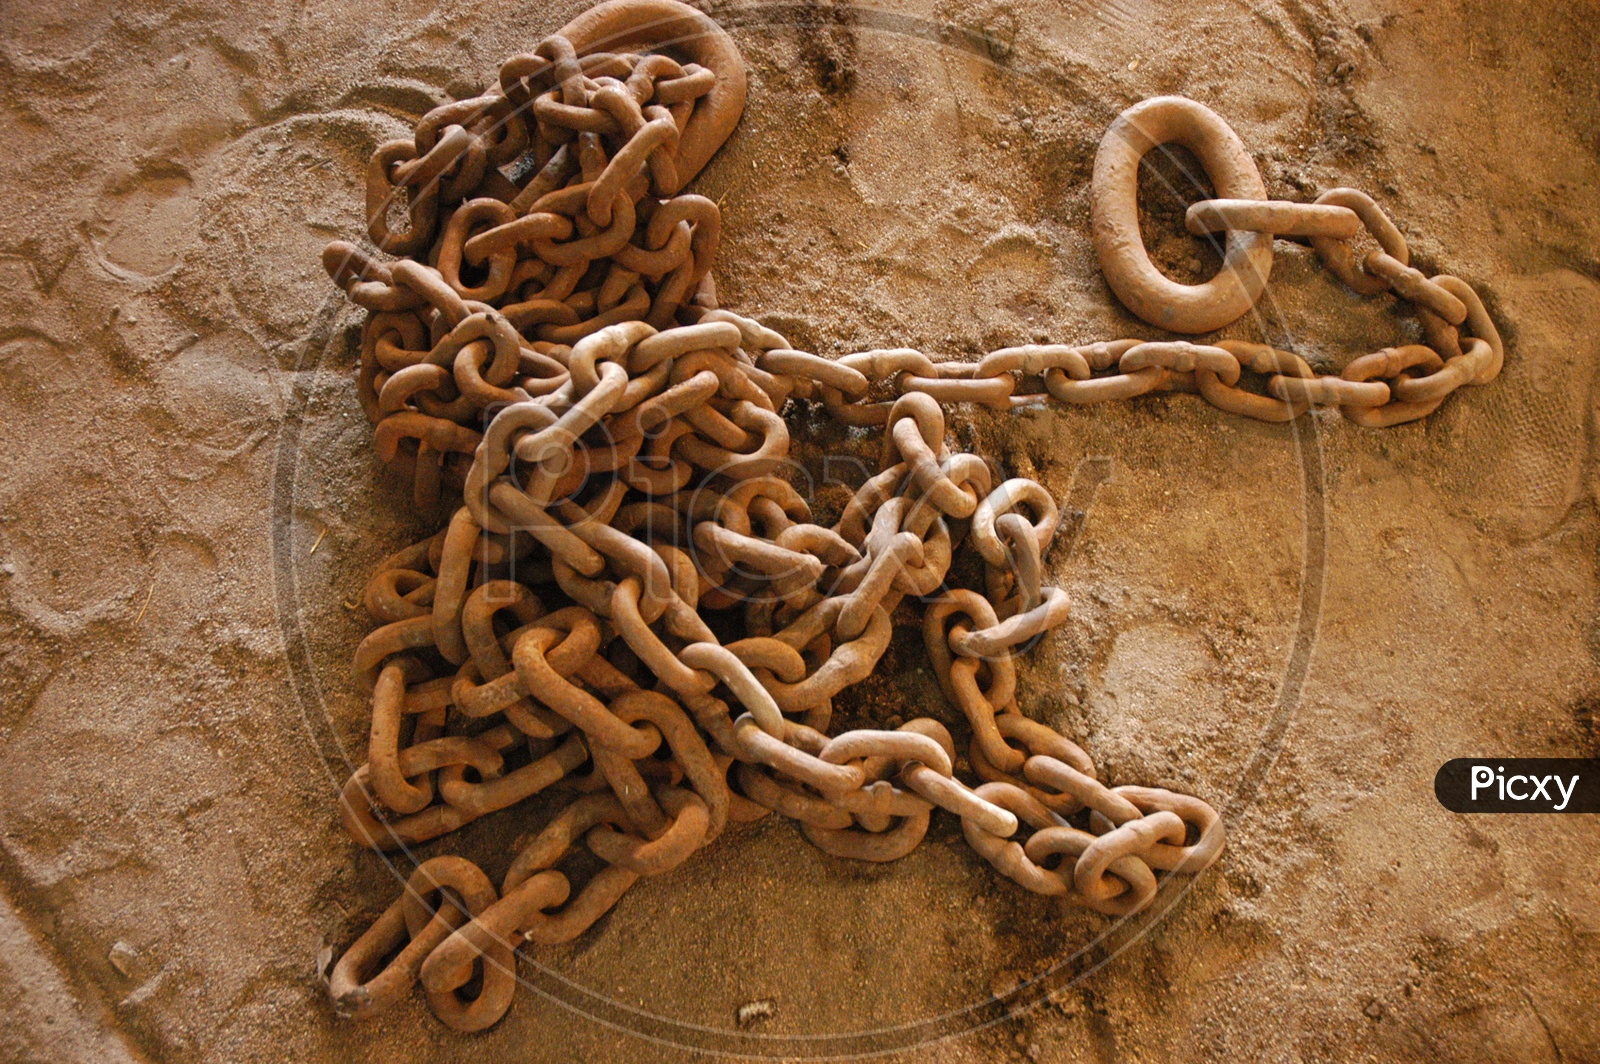 A rusted chain laying on sand